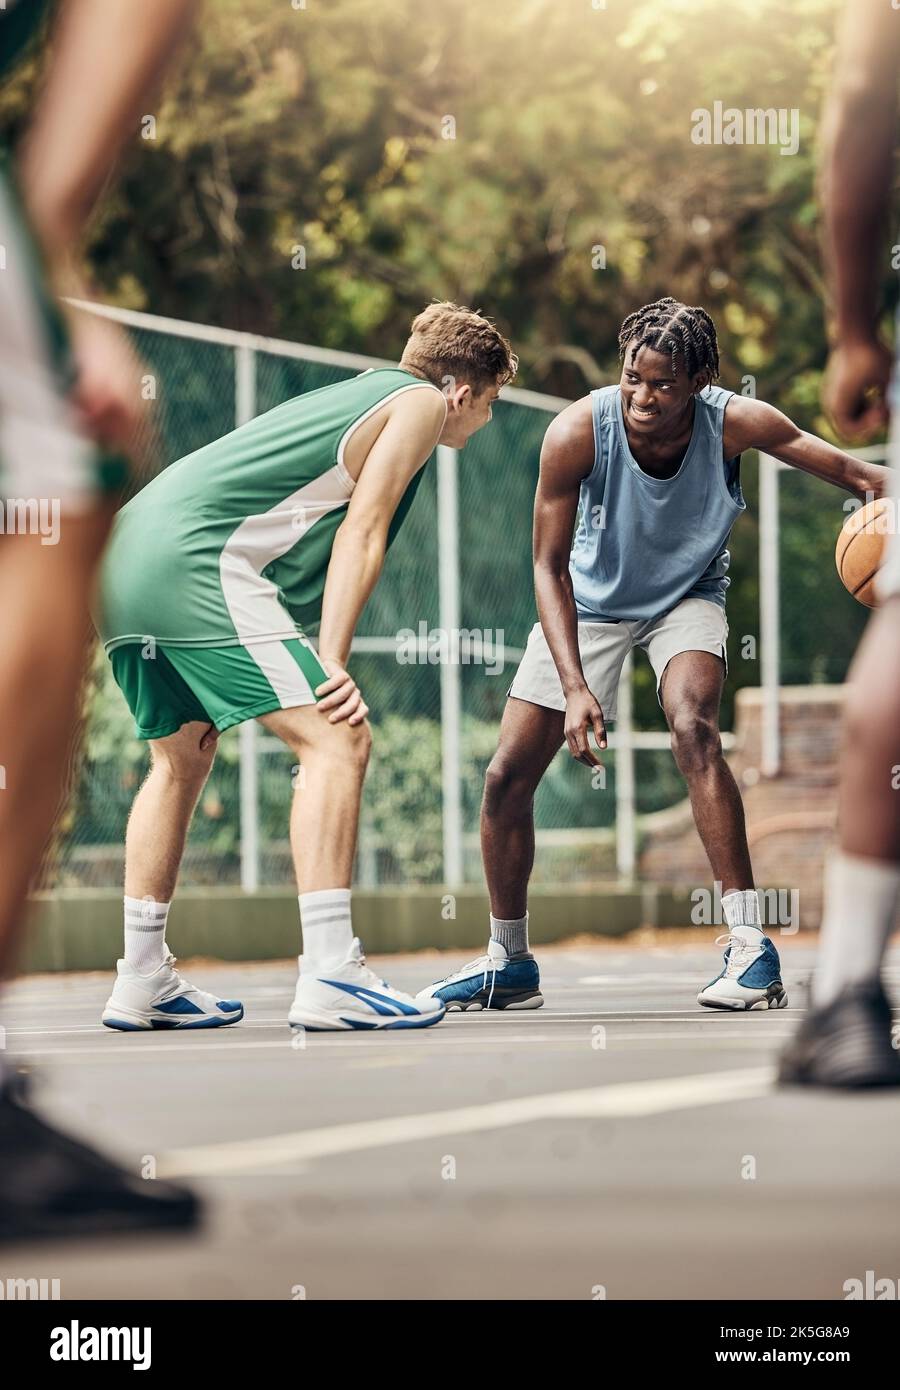 Men play basketball, team training exercise and sports match. Outdoor basketball court for a group exercise, fitness and workout for competition win Stock Photo